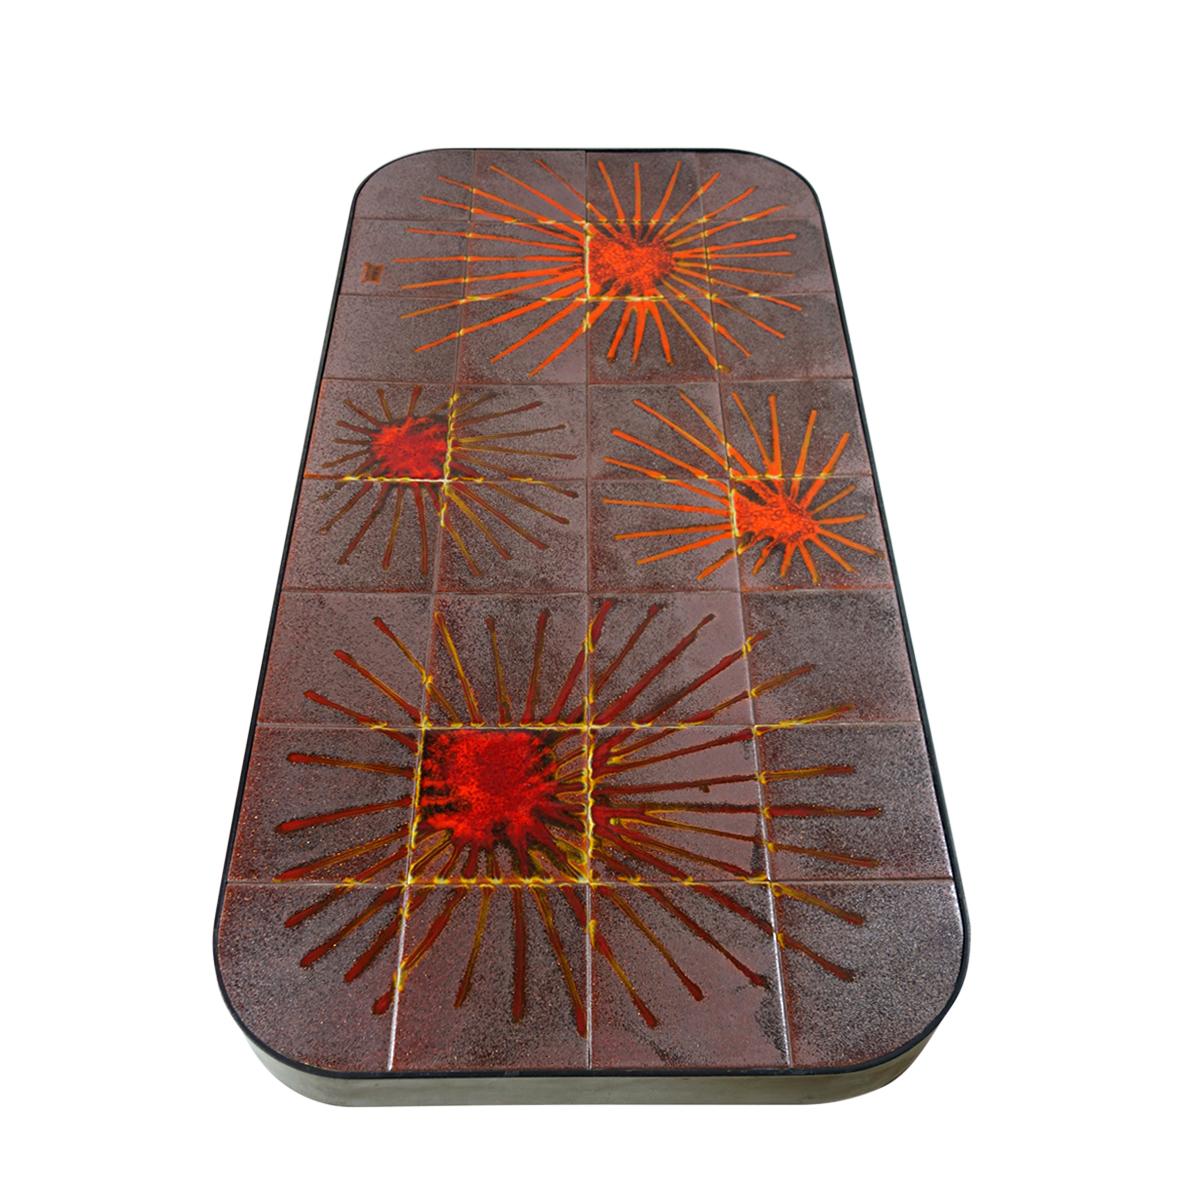 French Rectangular Midcentury Coffee Table with Sun Tile Decor La Roue by Vallauris For Sale